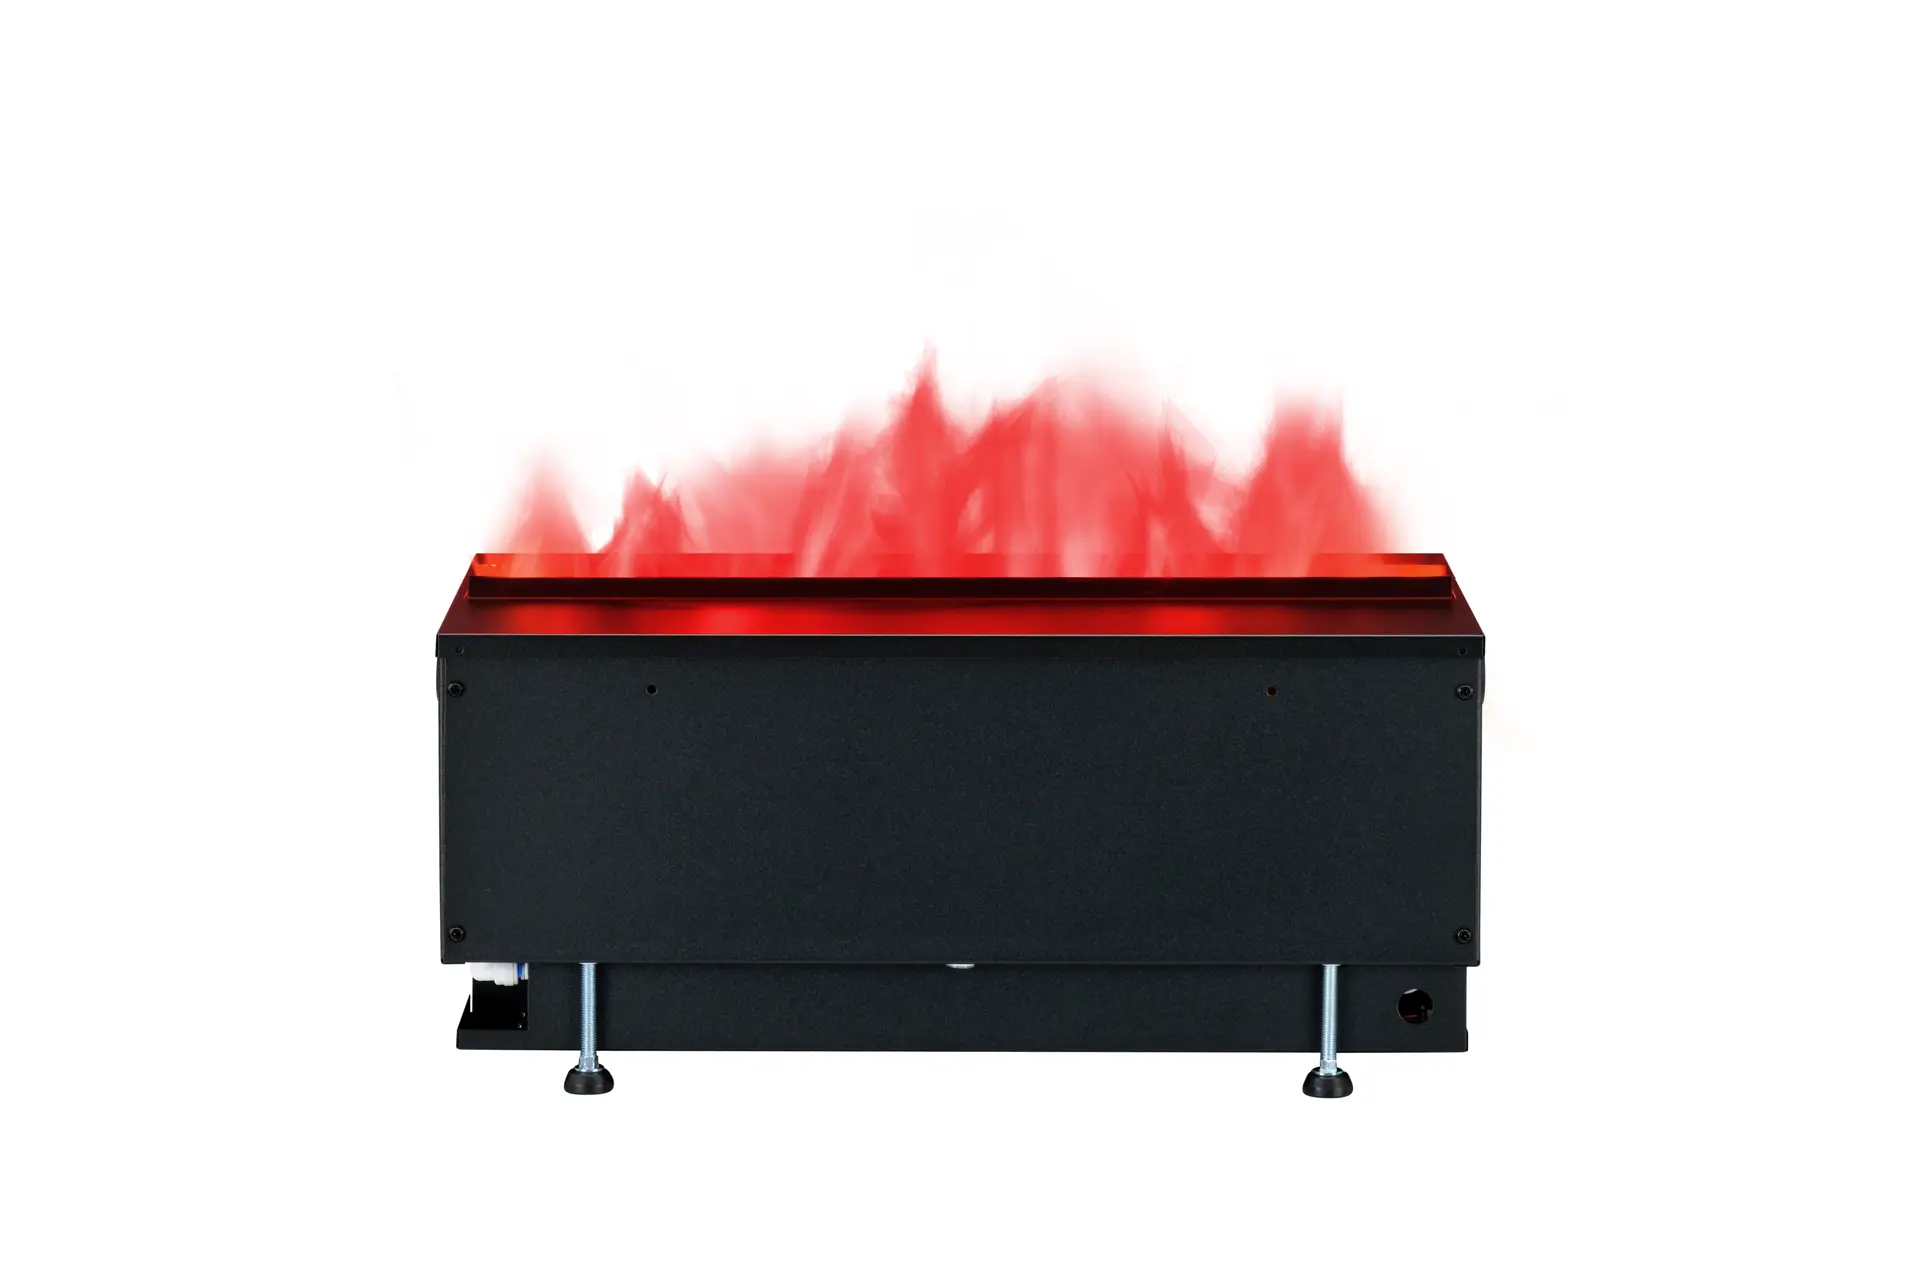 Dimplex_Cassette 500 projects_400001274_Front Red Flame.jpg